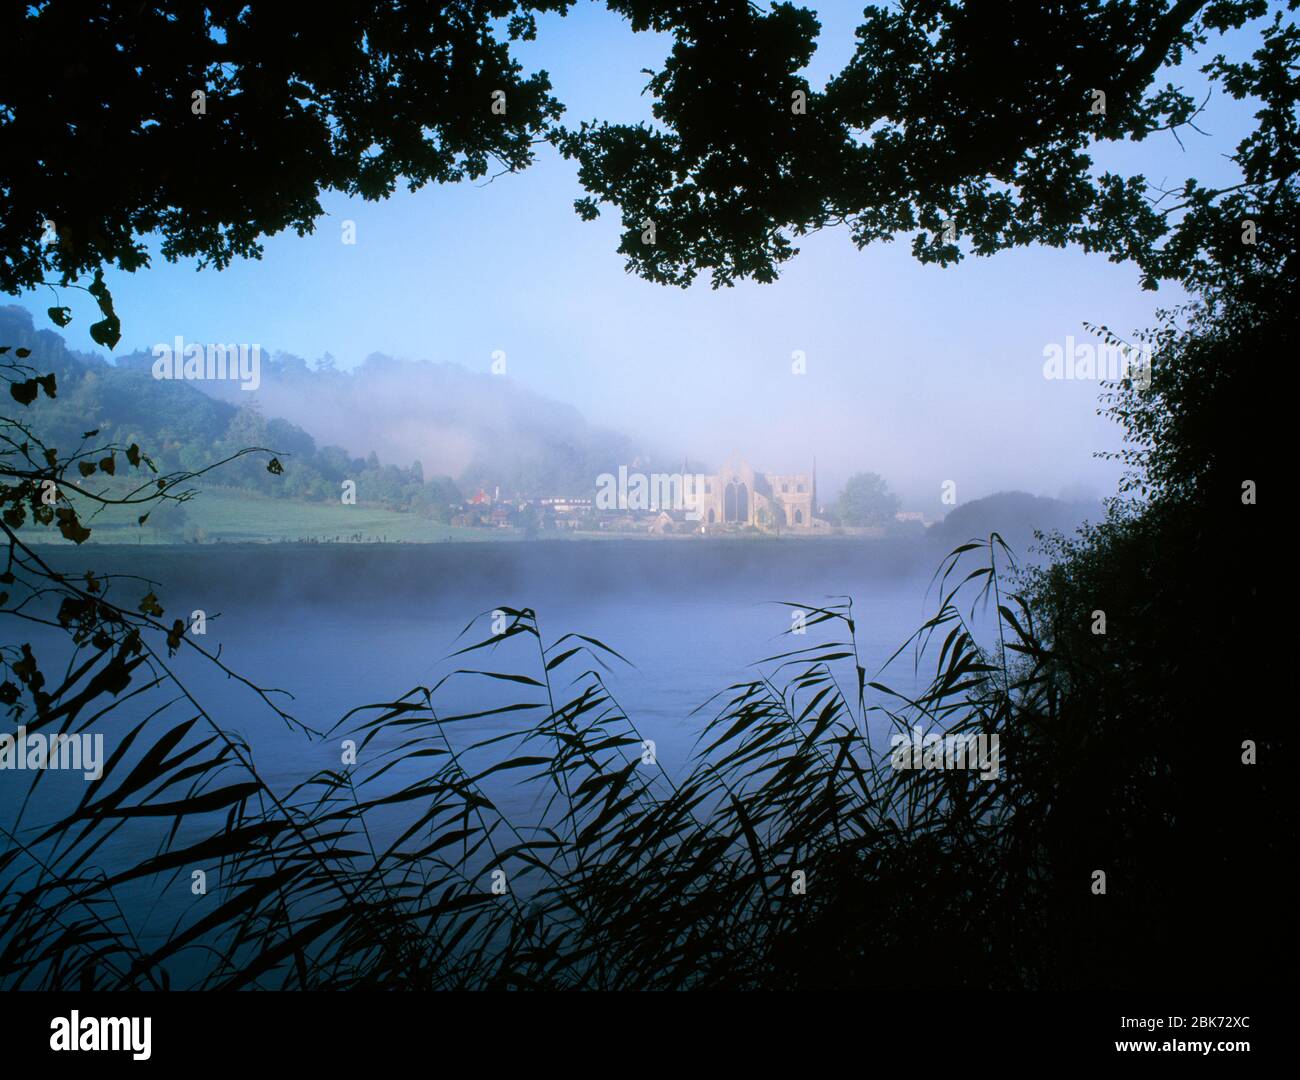 Tintern Abbey beside River Wye, Tintern Pava, Chepstow, Monmouthshire, South Wales. Misty summer morning. Stock Photo